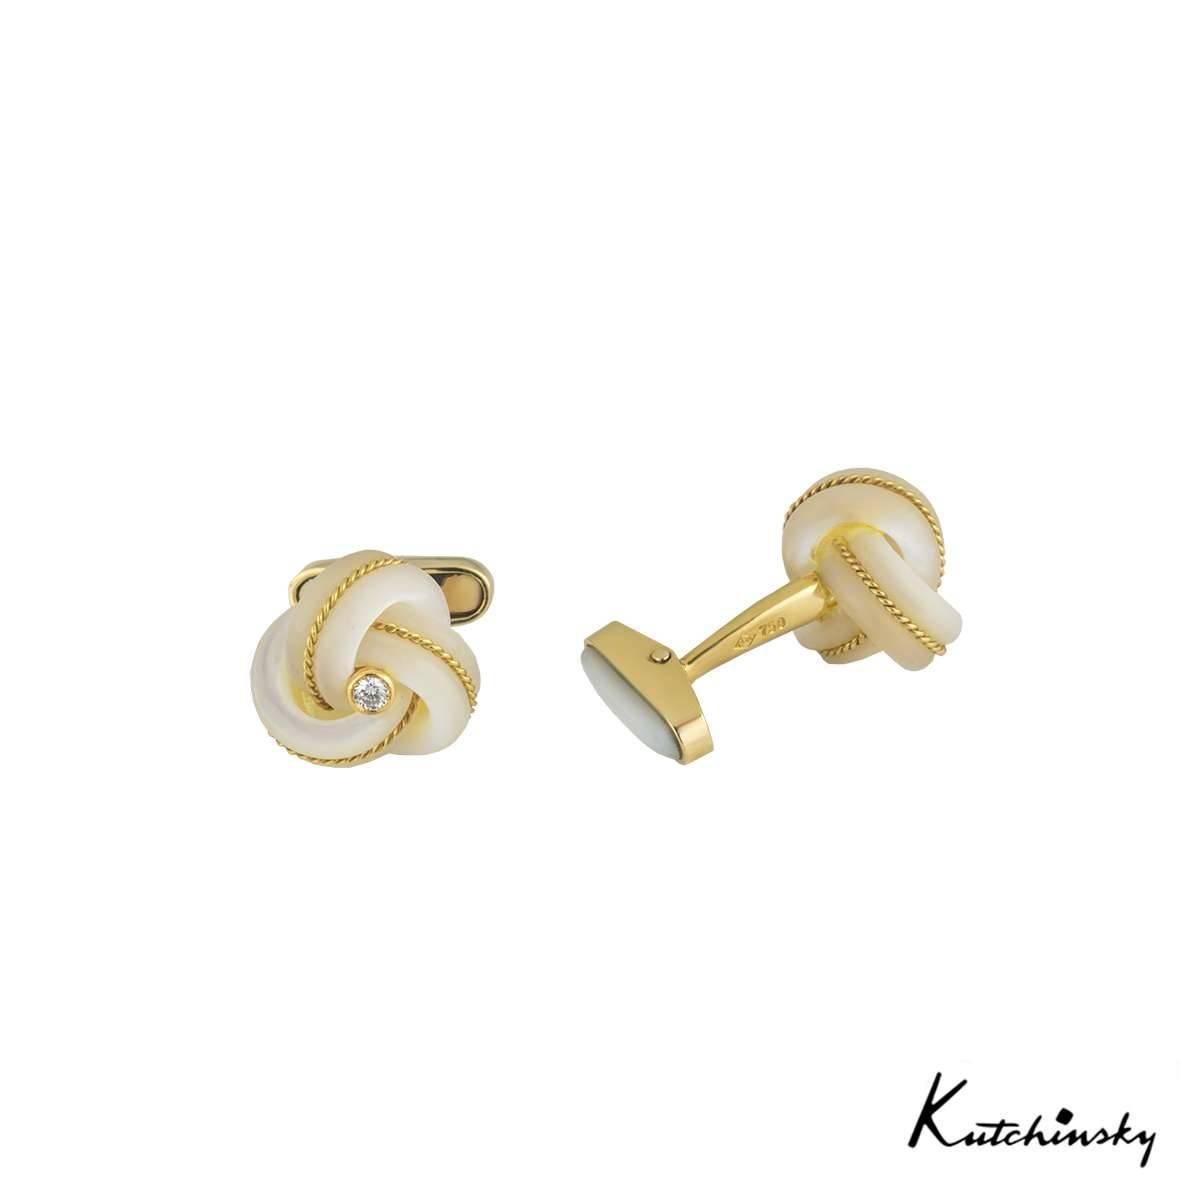 A unique pair of 18k yellow gold, mother of pearl and diamond cufflinks from Kutchinsky. The cufflinks feature a mother of pearl knot style with yellow gold beading running in the middle of each wrapped piece. The mother of pearl knot meets with a